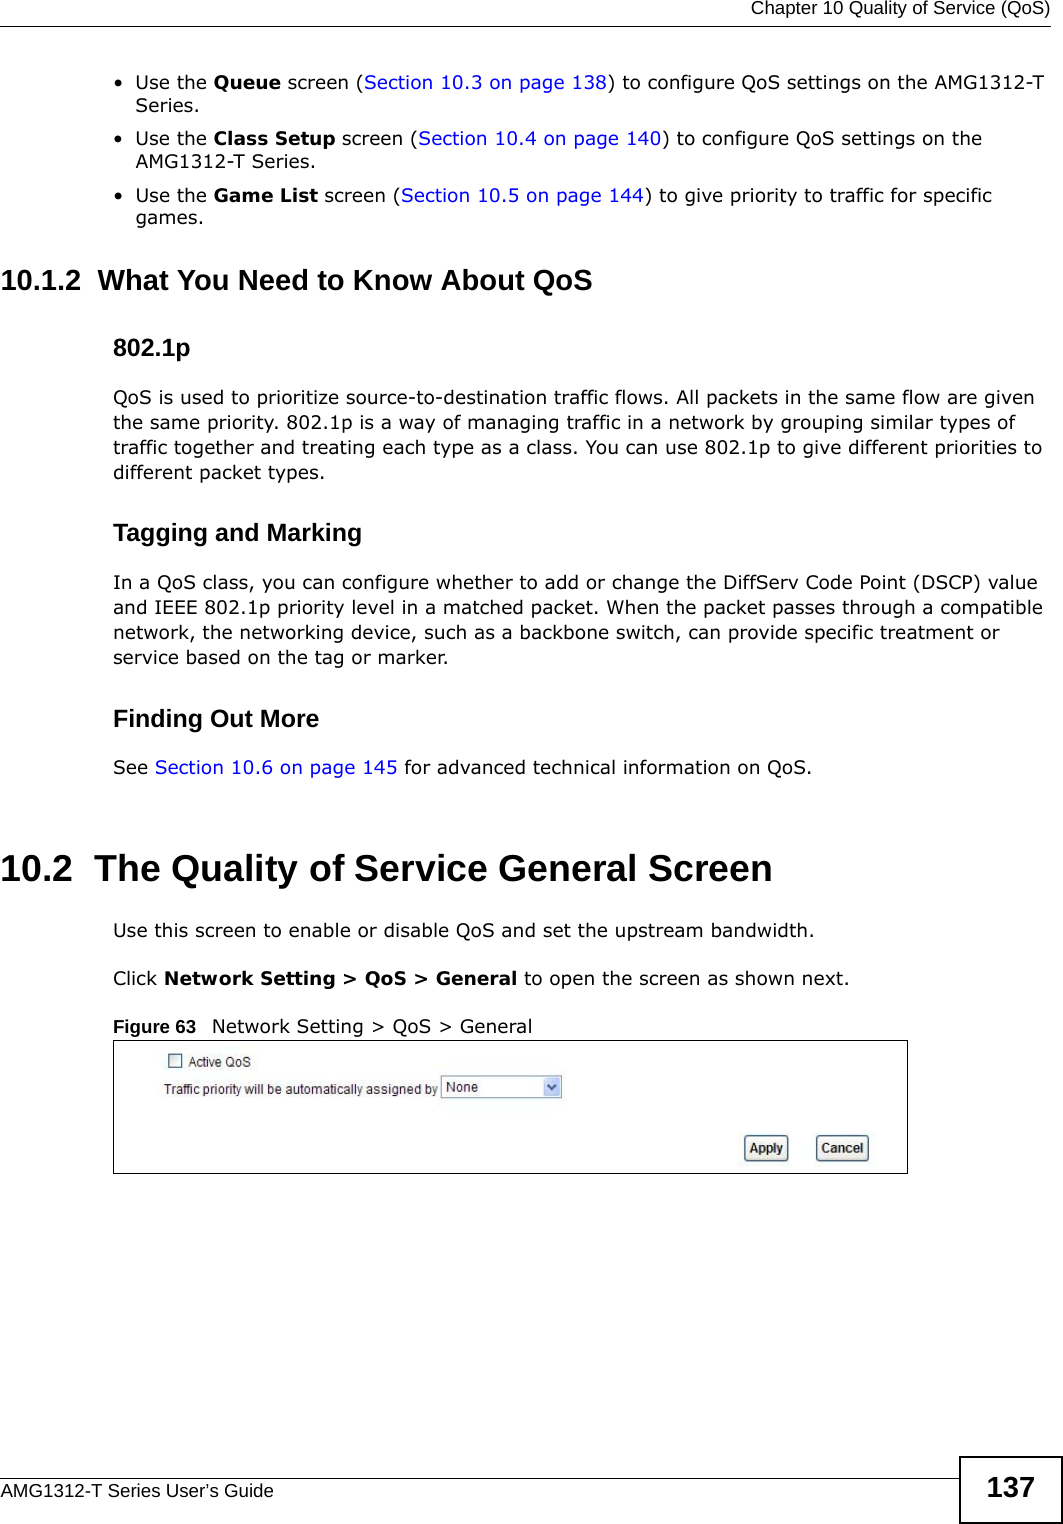  Chapter 10 Quality of Service (QoS)AMG1312-T Series User’s Guide 137•Use the Queue screen (Section 10.3 on page 138) to configure QoS settings on the AMG1312-T Series.•Use the Class Setup screen (Section 10.4 on page 140) to configure QoS settings on the AMG1312-T Series.•Use the Game List screen (Section 10.5 on page 144) to give priority to traffic for specific games.10.1.2  What You Need to Know About QoS802.1pQoS is used to prioritize source-to-destination traffic flows. All packets in the same flow are given the same priority. 802.1p is a way of managing traffic in a network by grouping similar types of traffic together and treating each type as a class. You can use 802.1p to give different priorities to different packet types. Tagging and MarkingIn a QoS class, you can configure whether to add or change the DiffServ Code Point (DSCP) value and IEEE 802.1p priority level in a matched packet. When the packet passes through a compatible network, the networking device, such as a backbone switch, can provide specific treatment or service based on the tag or marker.Finding Out MoreSee Section 10.6 on page 145 for advanced technical information on QoS.10.2  The Quality of Service General ScreenUse this screen to enable or disable QoS and set the upstream bandwidth.Click Network Setting &gt; QoS &gt; General to open the screen as shown next.Figure 63   Network Setting &gt; QoS &gt; General